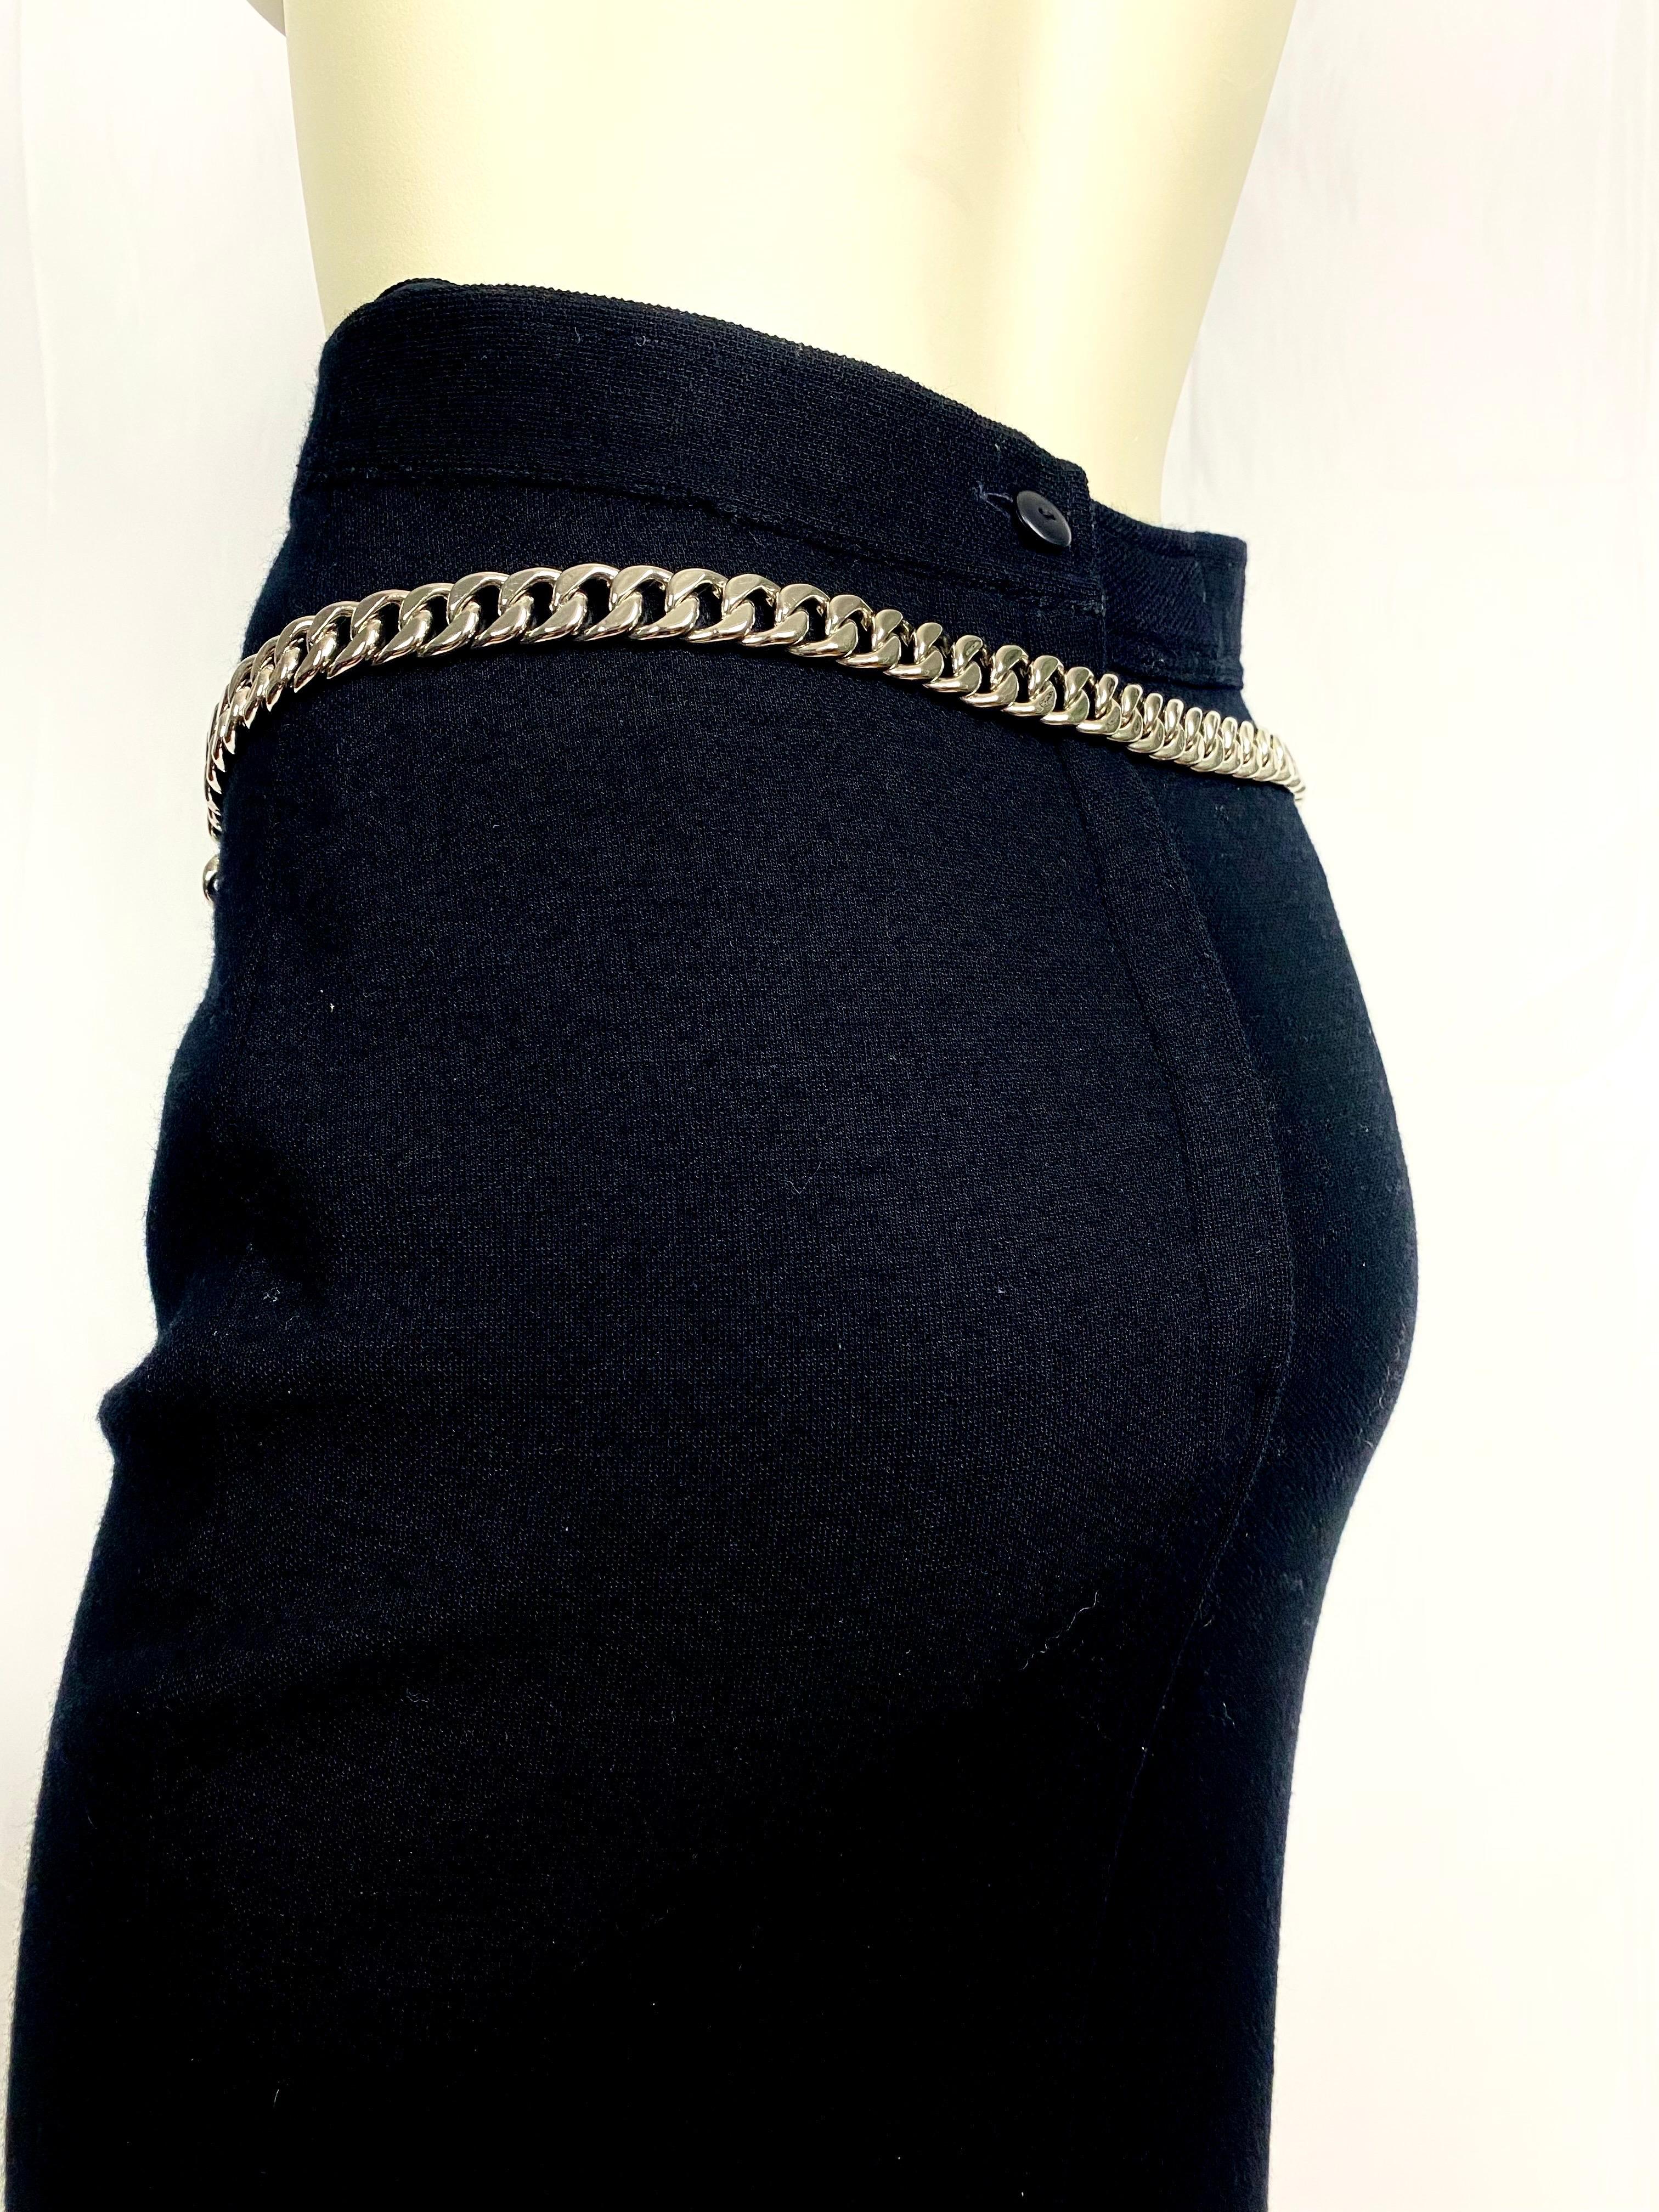 Vintage Chanel heavy silver chain link belt For Sale 6